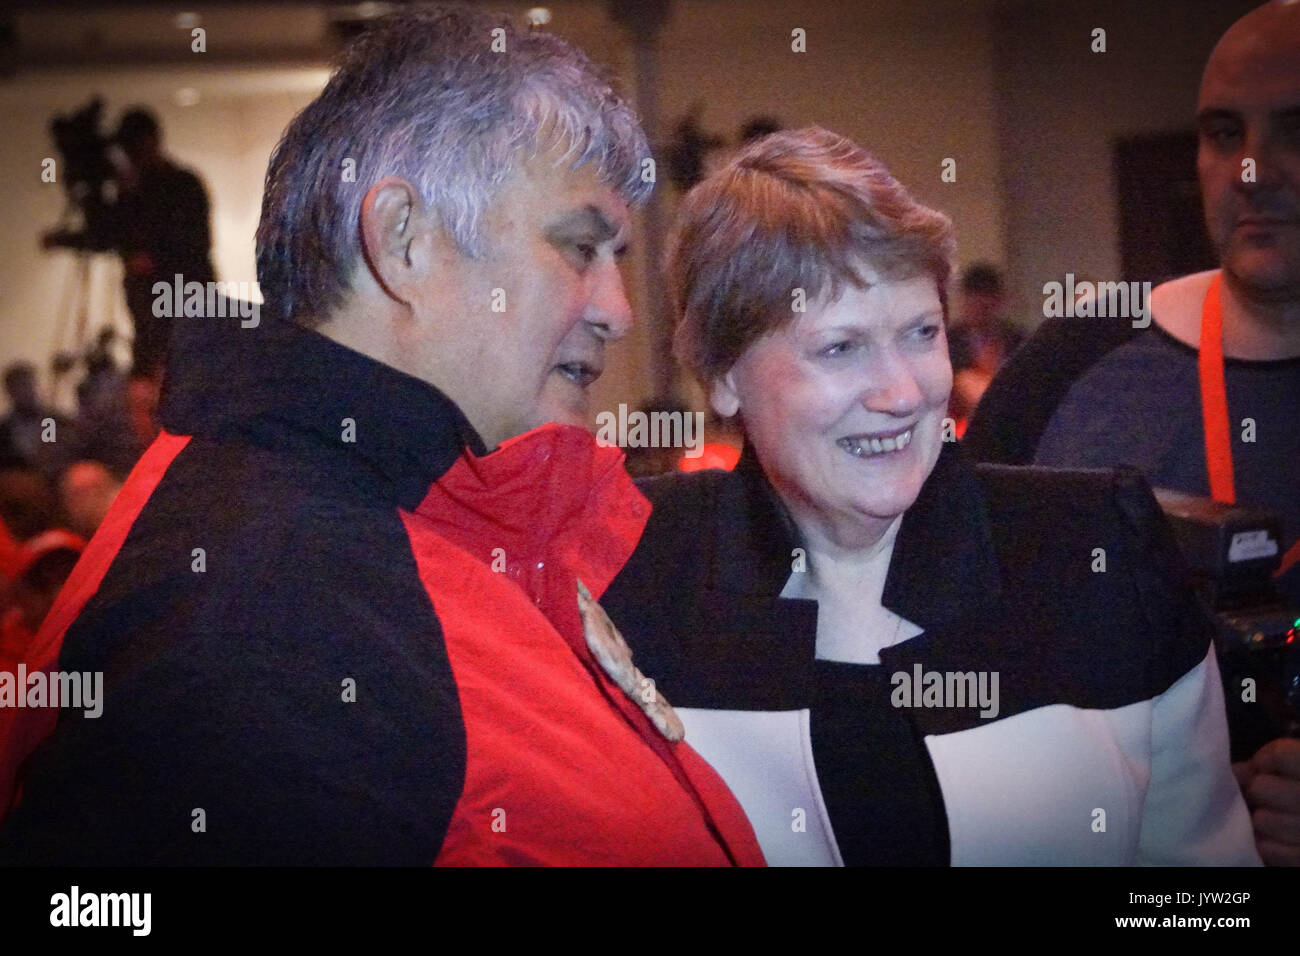 Auckland, New Zealand. 20th Aug, 2017. Former Prime Minister Helen Clark (R) prior to the Labour Party's official campaign launch at Auckland Town Hall, New Zealand on Aug 20, 2017The 2017 New Zealand general election is scheduled to be held on 23 September 2017 . The current government is National Party. Credit: Shirley Kwok/Pacific Press/Alamy Live News Stock Photo